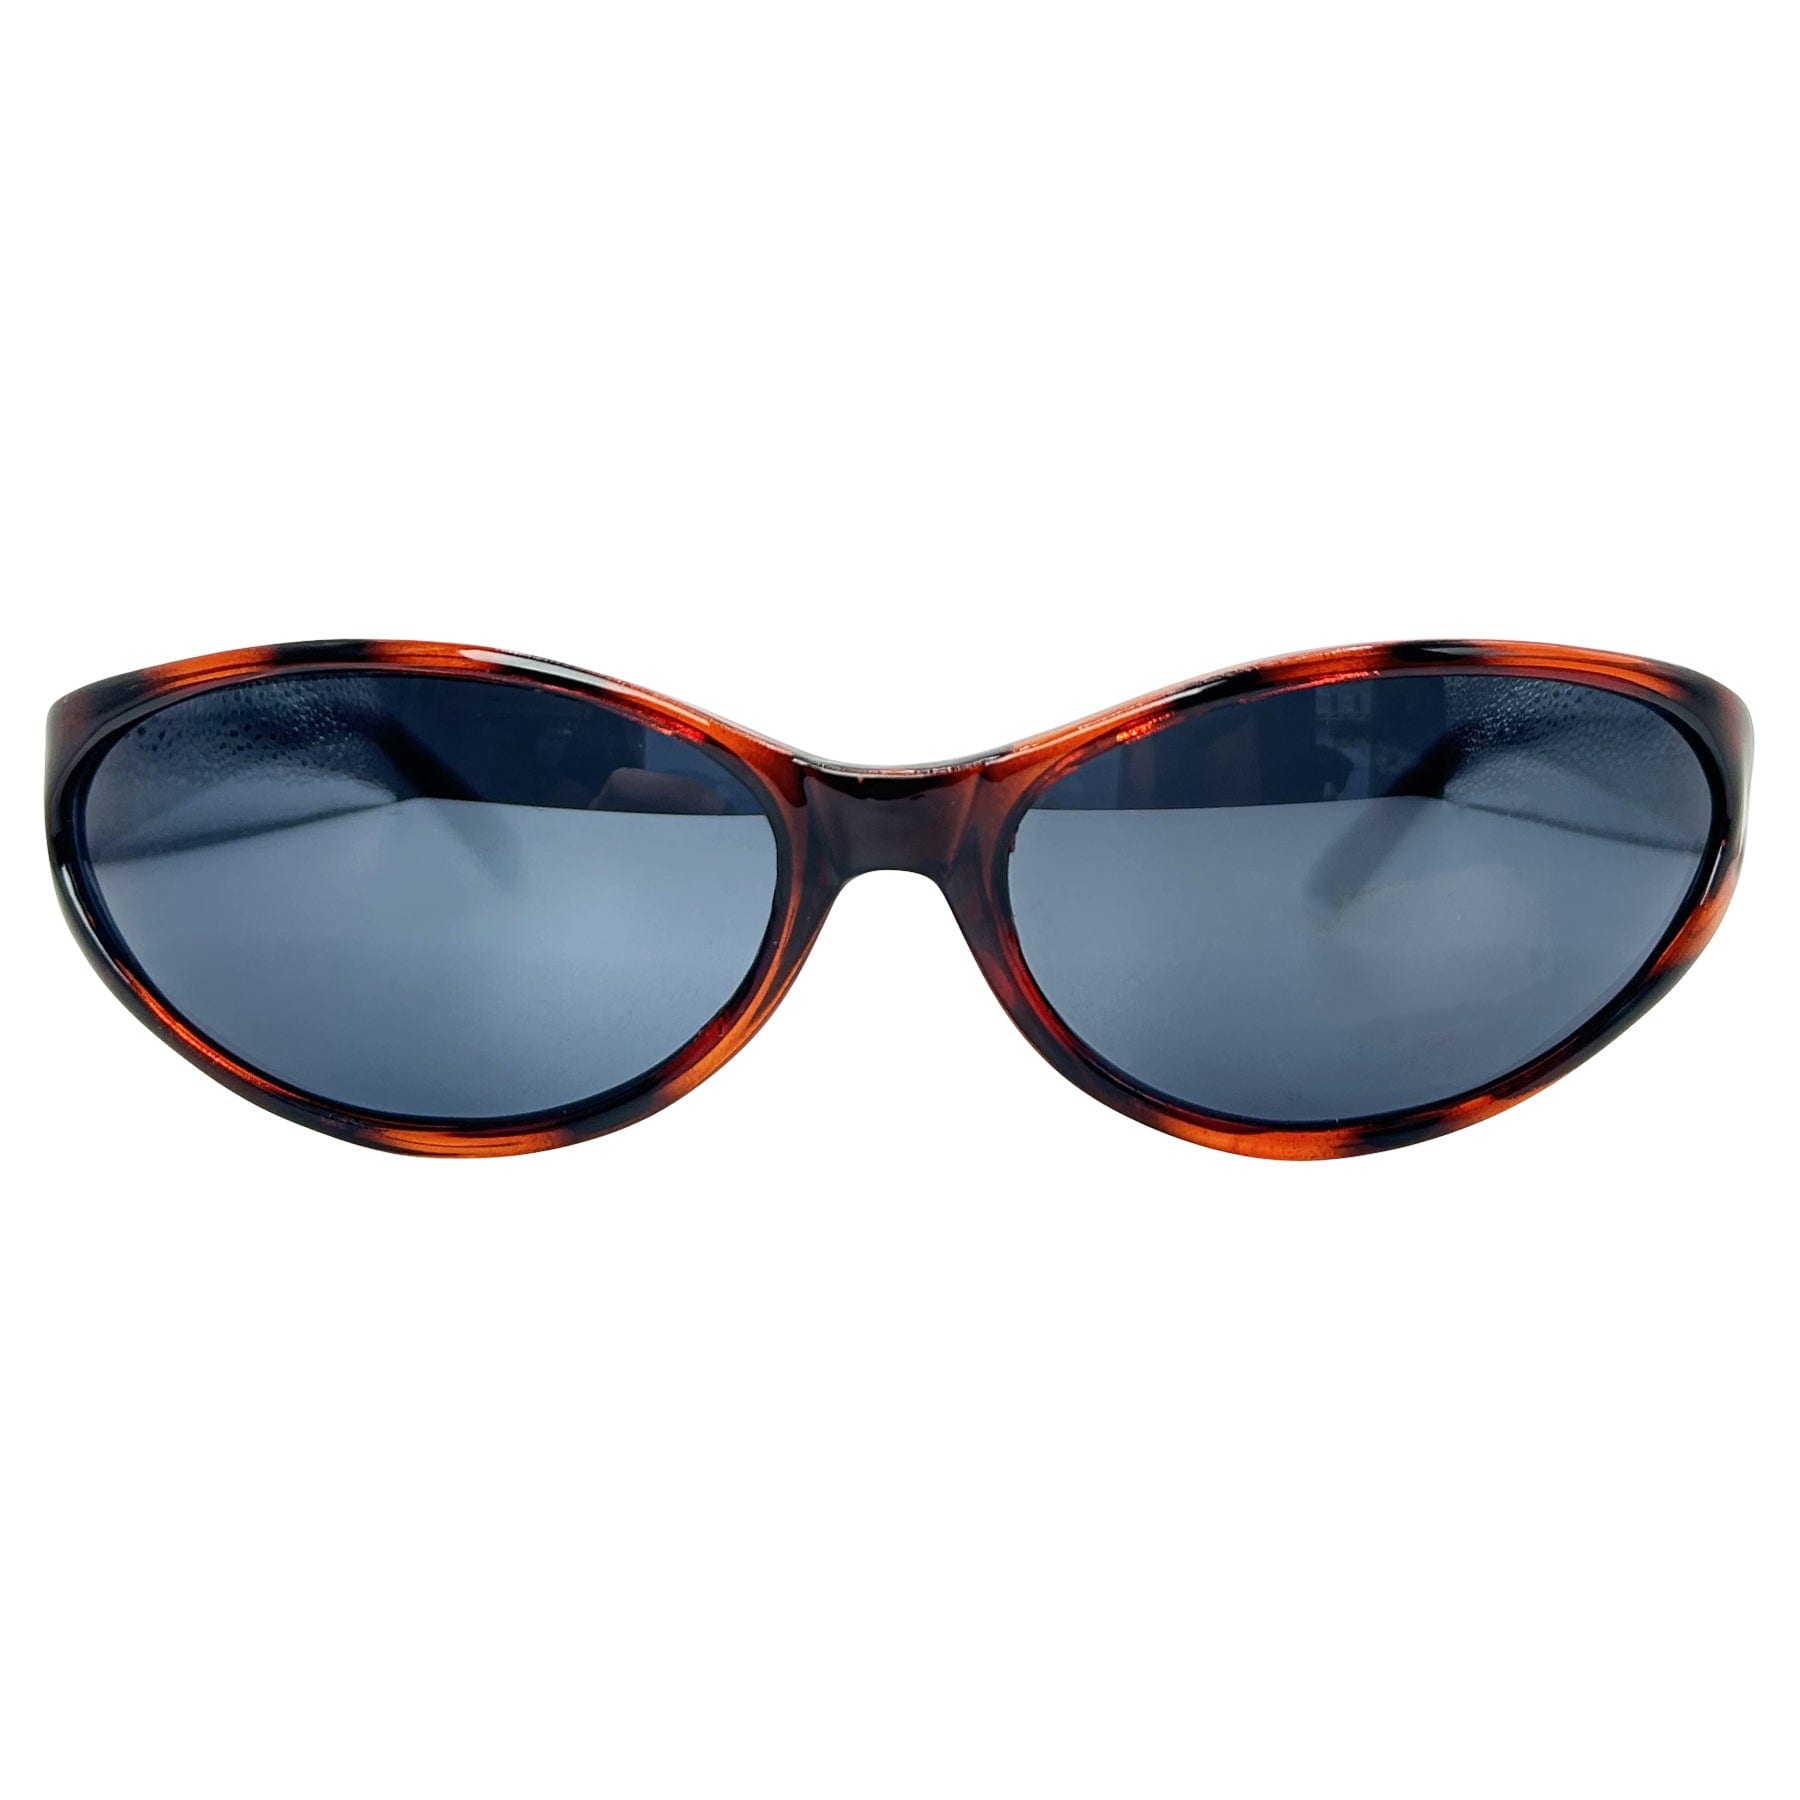 tortoise vintage sunglasses with a sporty style frame